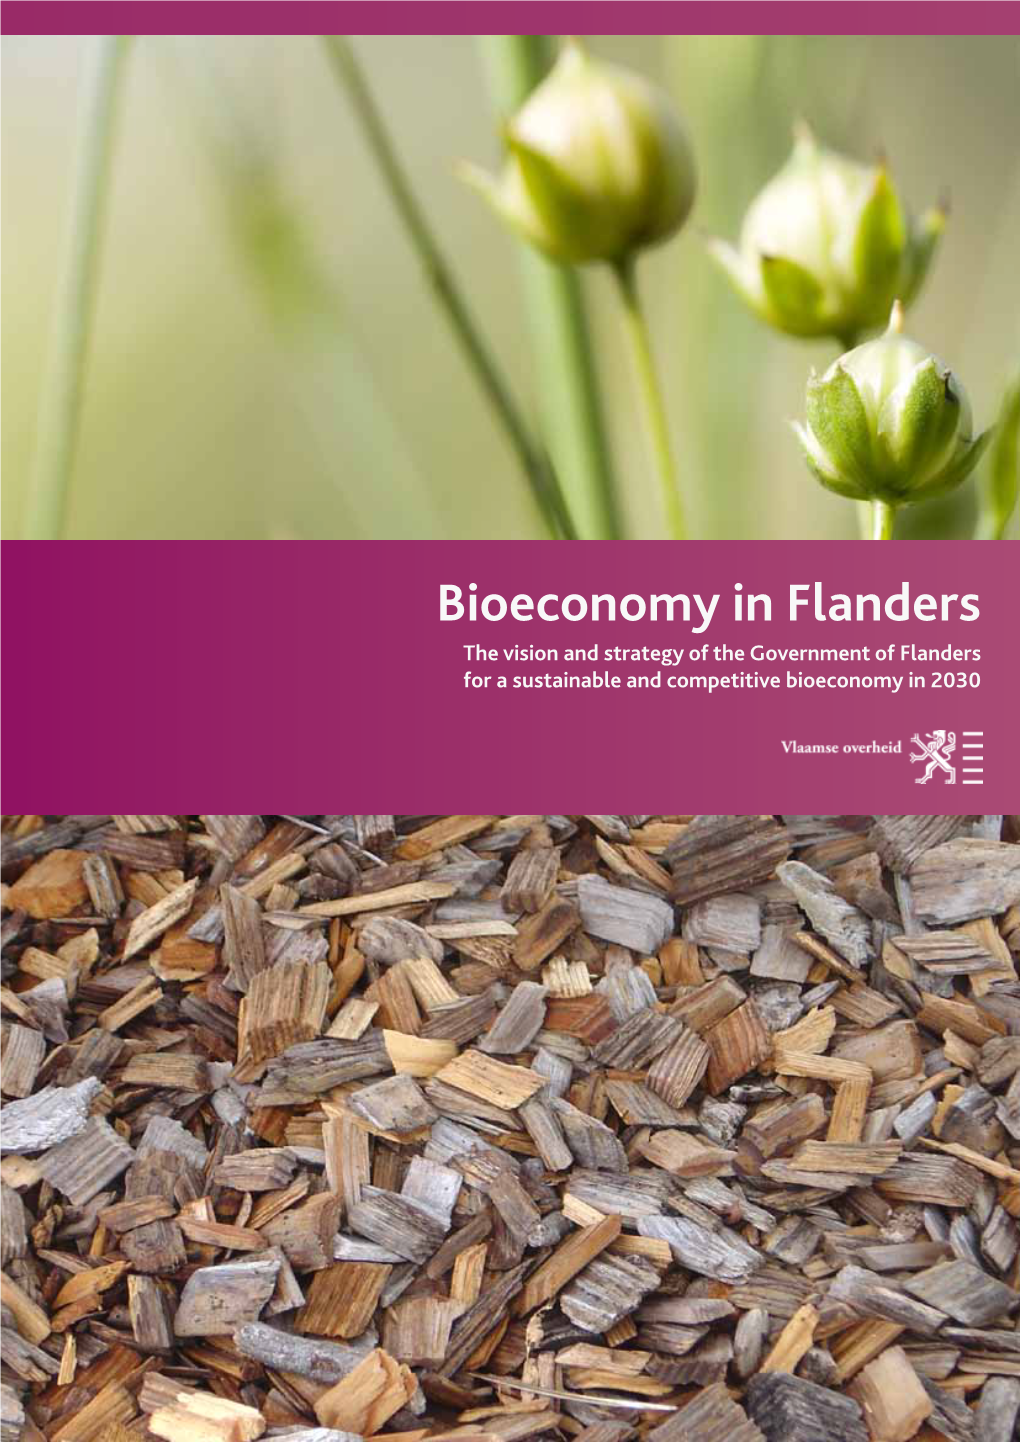 Bioeconomy in Flanders the Vision and Strategy of the Government of Flanders for a Sustainable and Competitive Bioeconomy in 2030